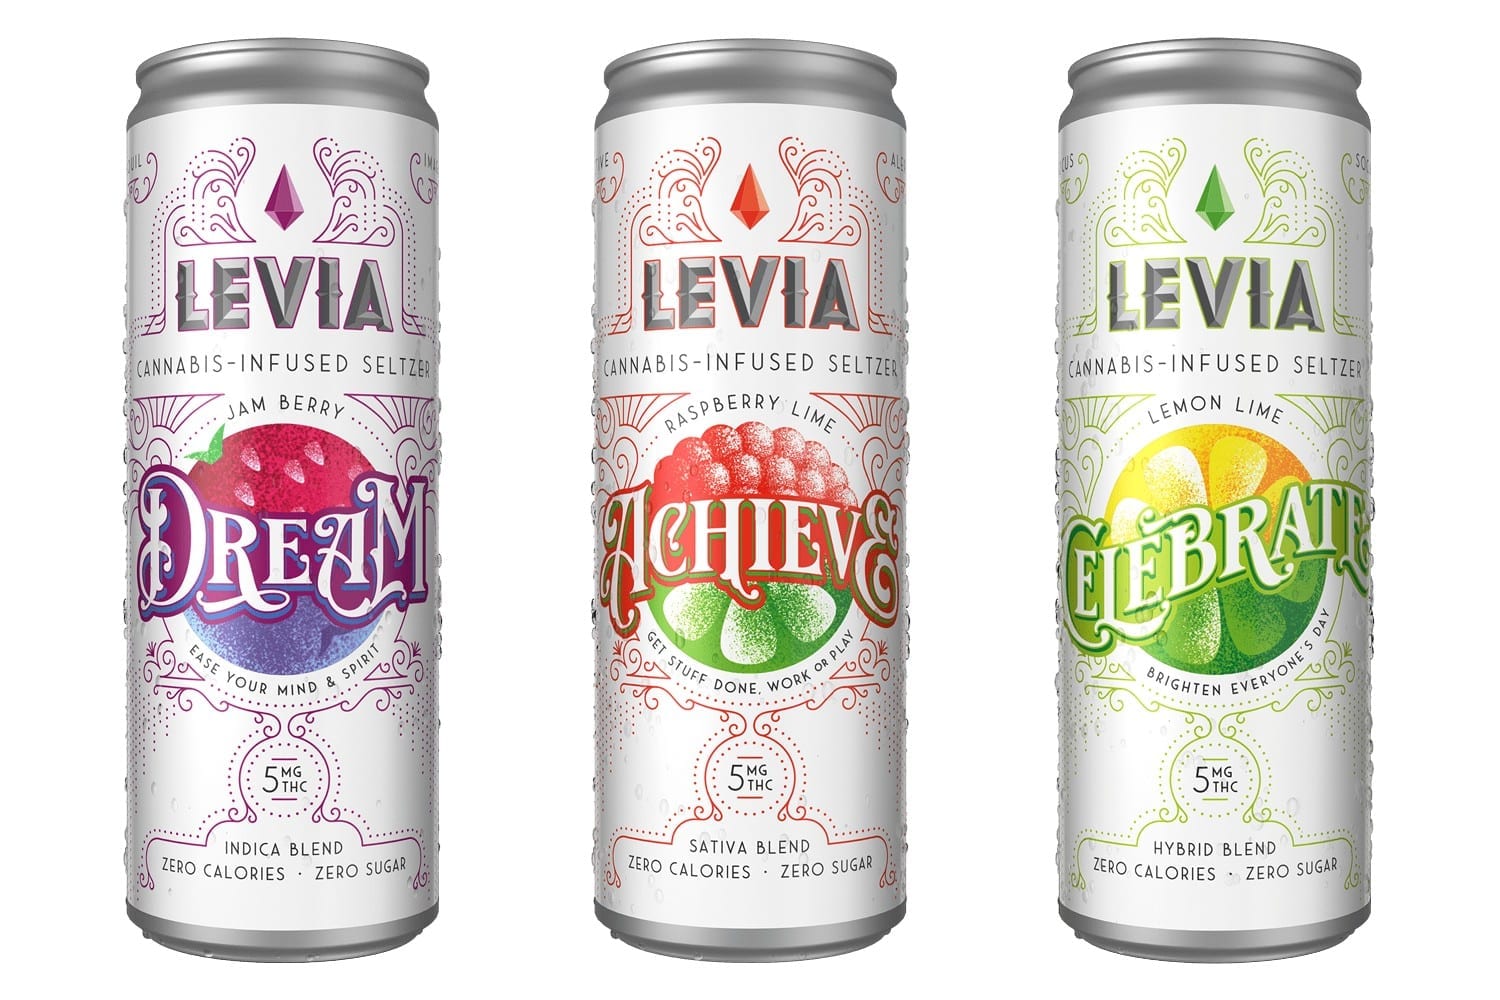 LEVIA Launches First Cannabis-Infused Seltzer in Massachusetts